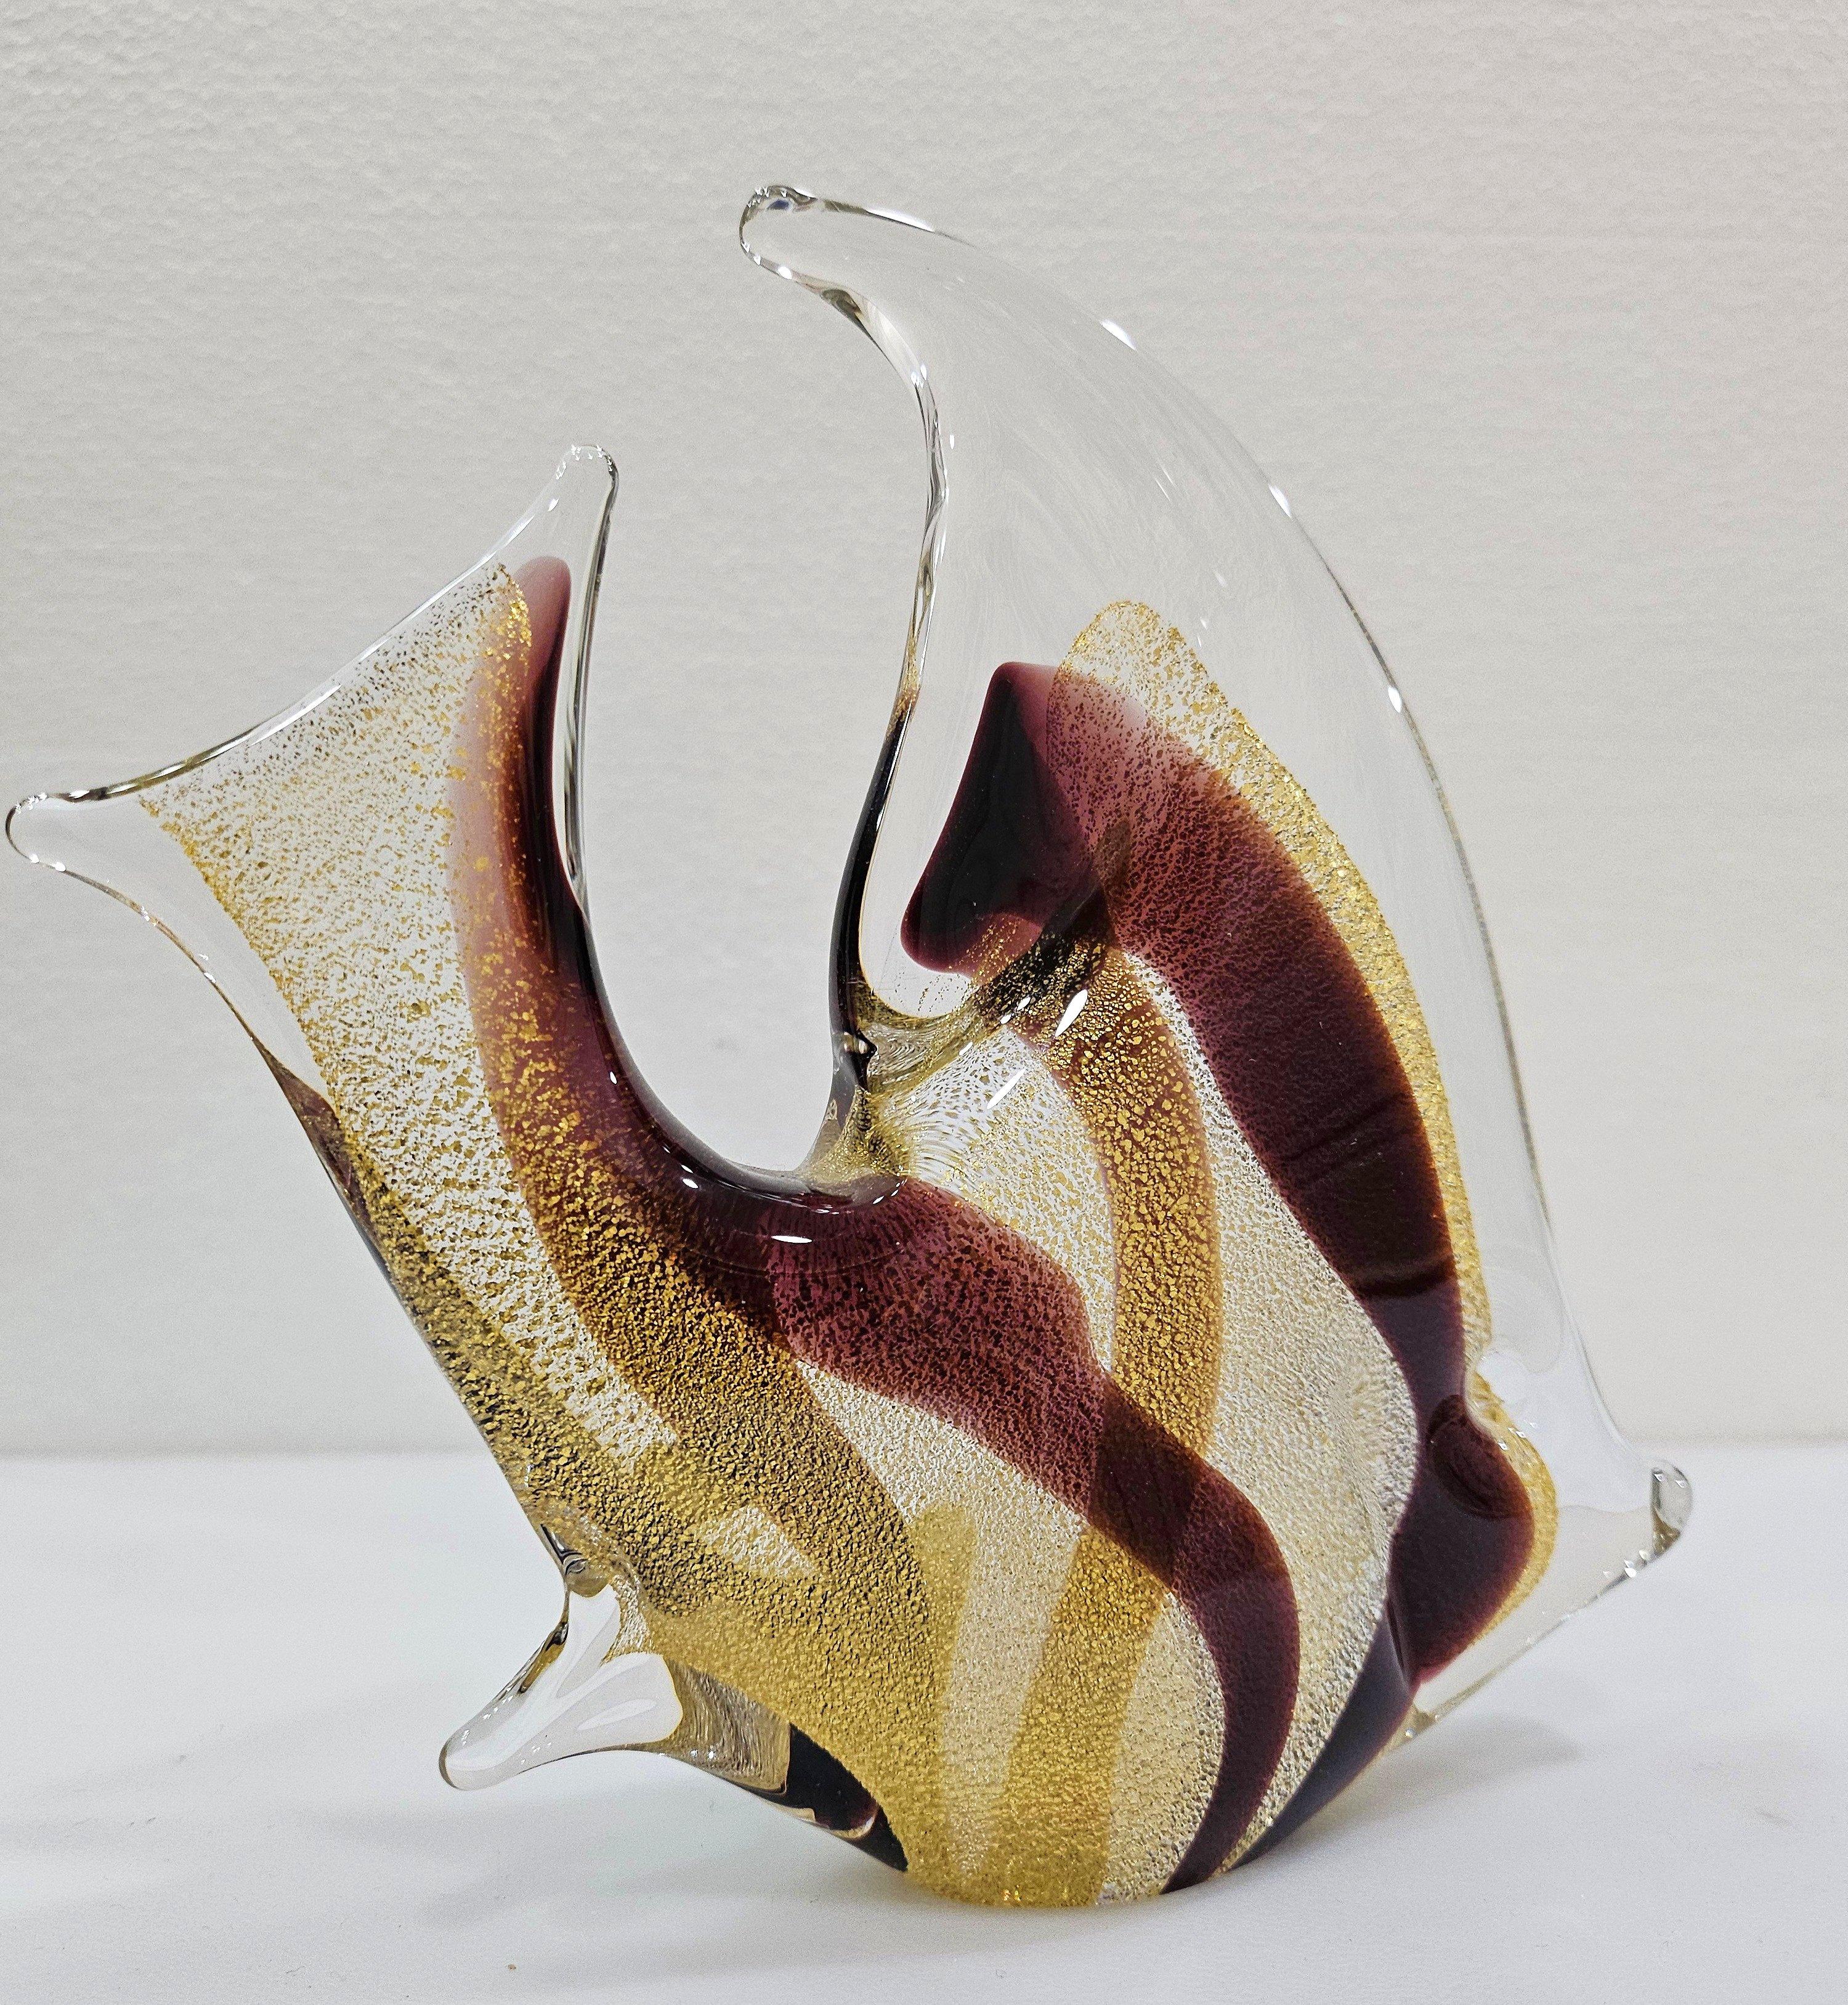 Murano Glass Signed, 24k gold infused, Glass Fish Sculpture by Josef Marcolin, original label For Sale